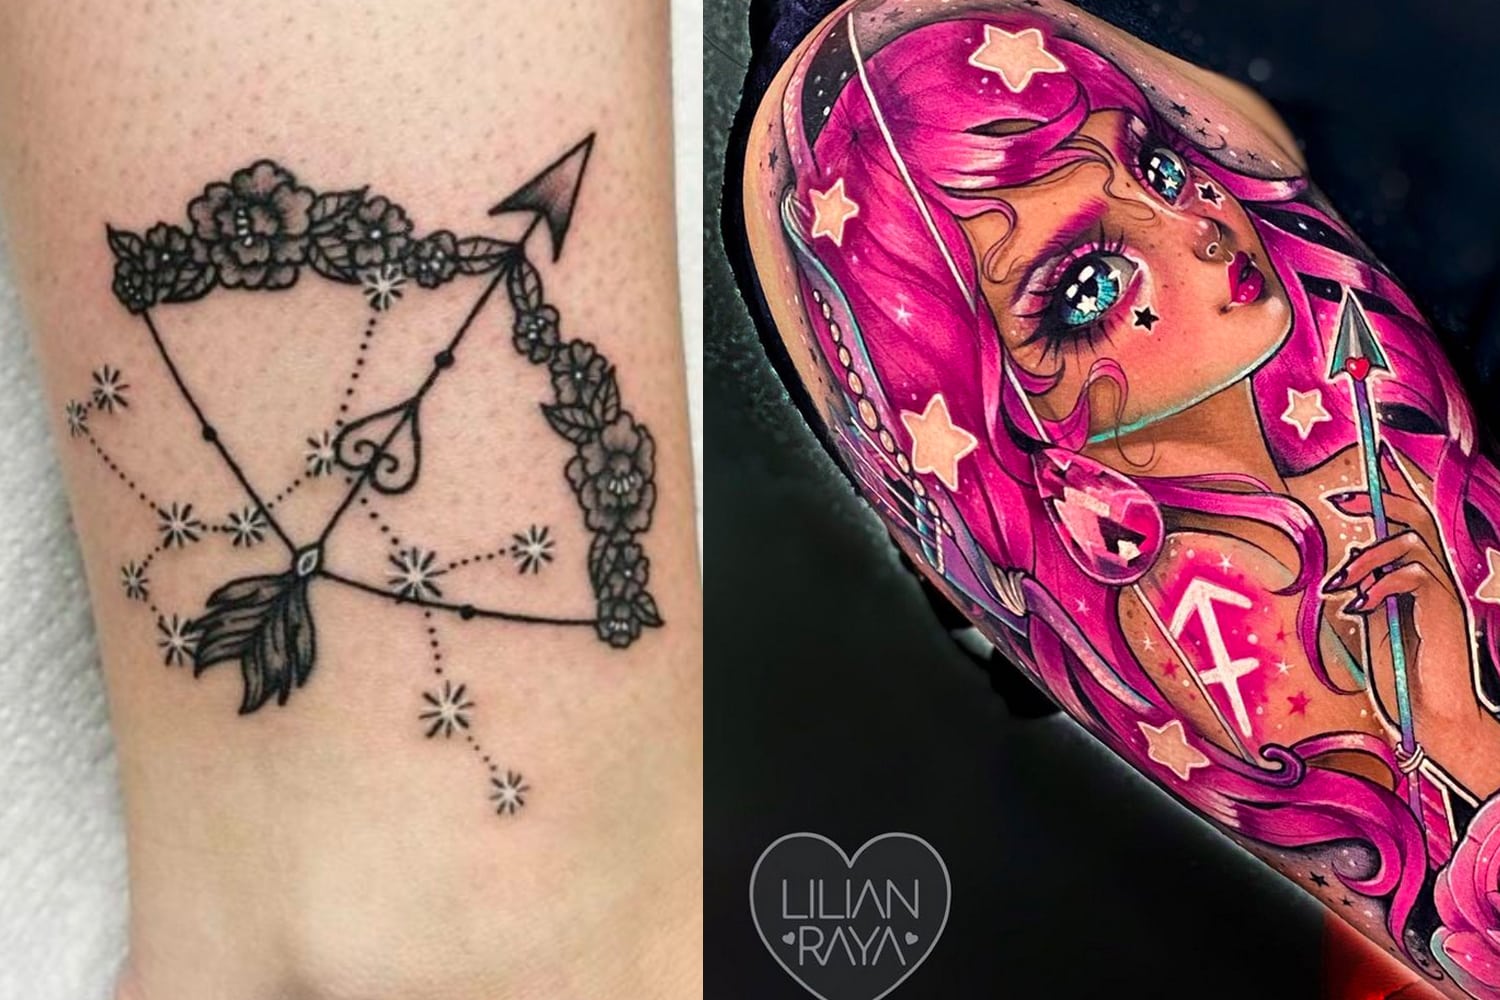 19 Sagittarius Tattoos to Show Off Your Fiery Personality - Let's Eat Cake